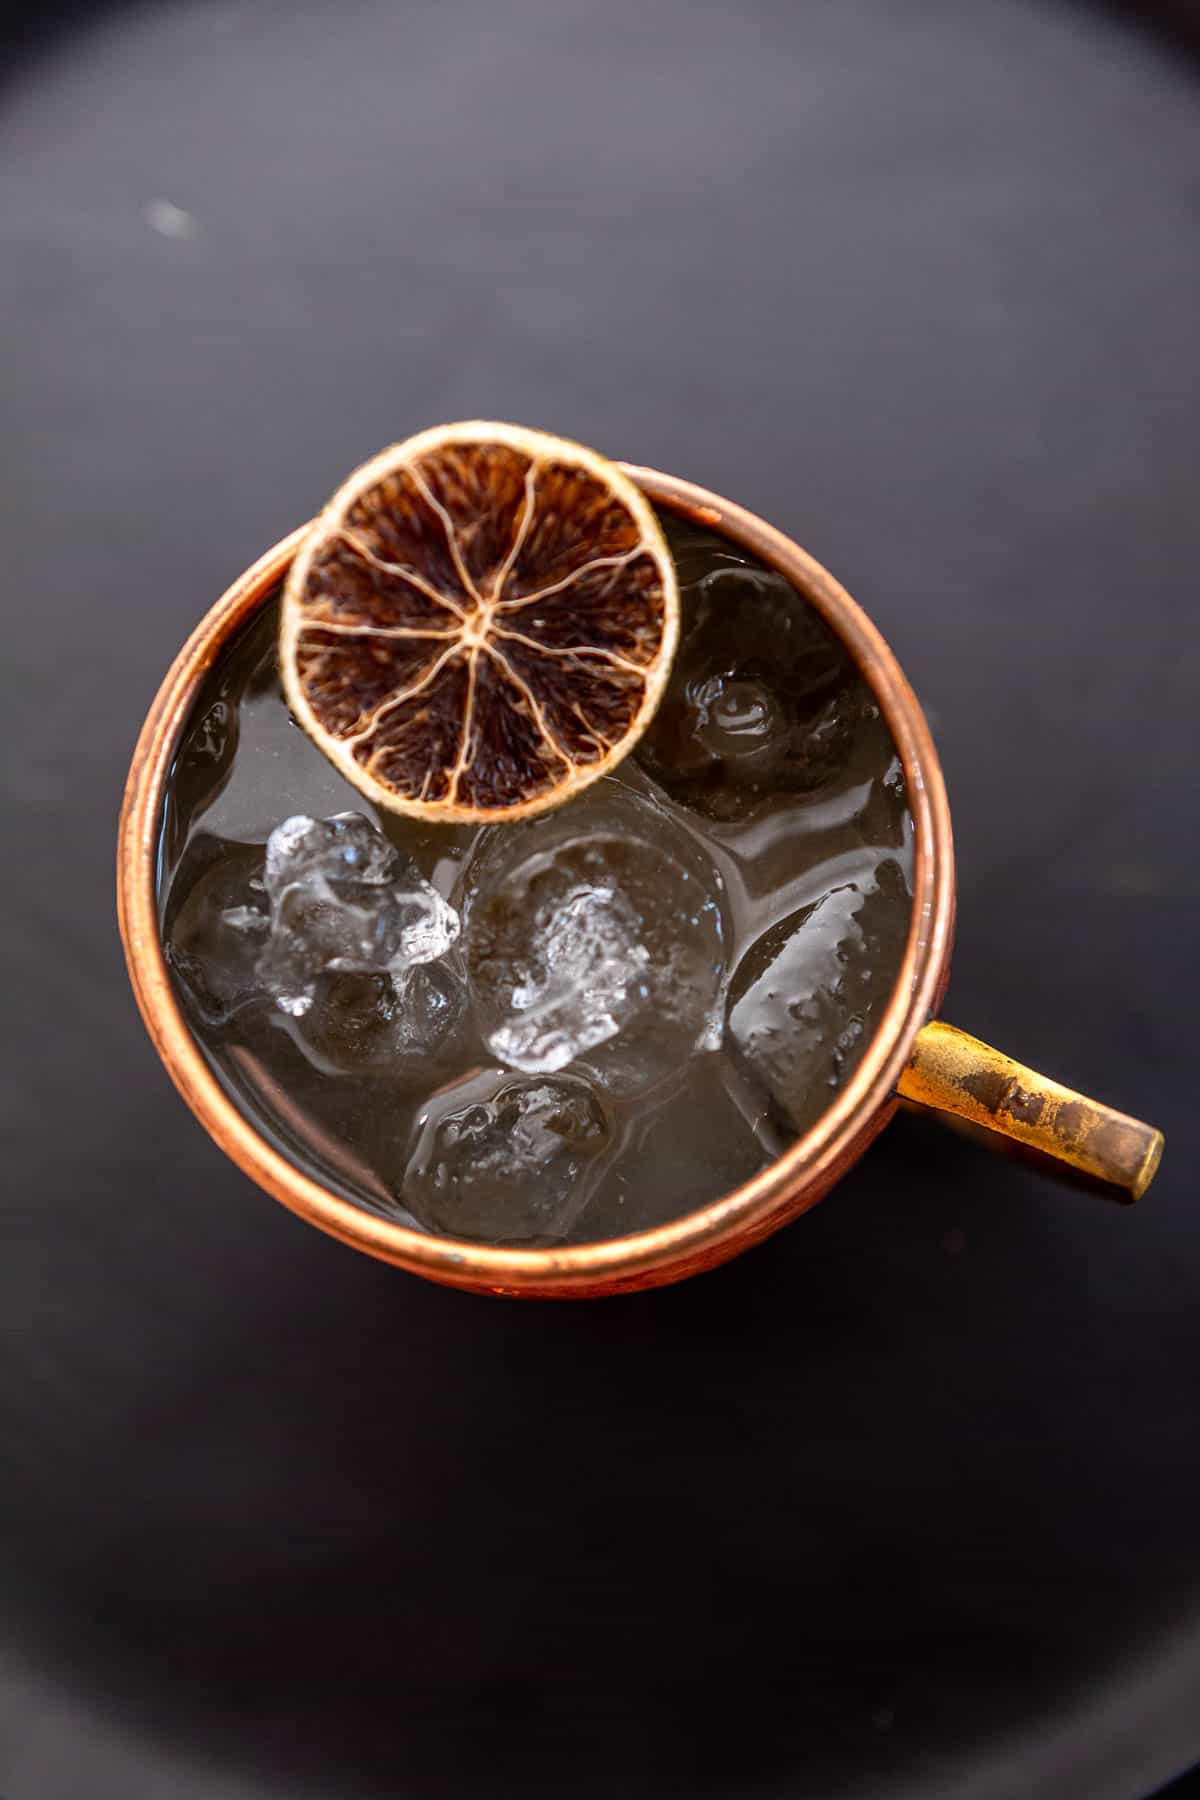 Overhead photo of a gin mule garnished with a dried lime wheel on a dark background.